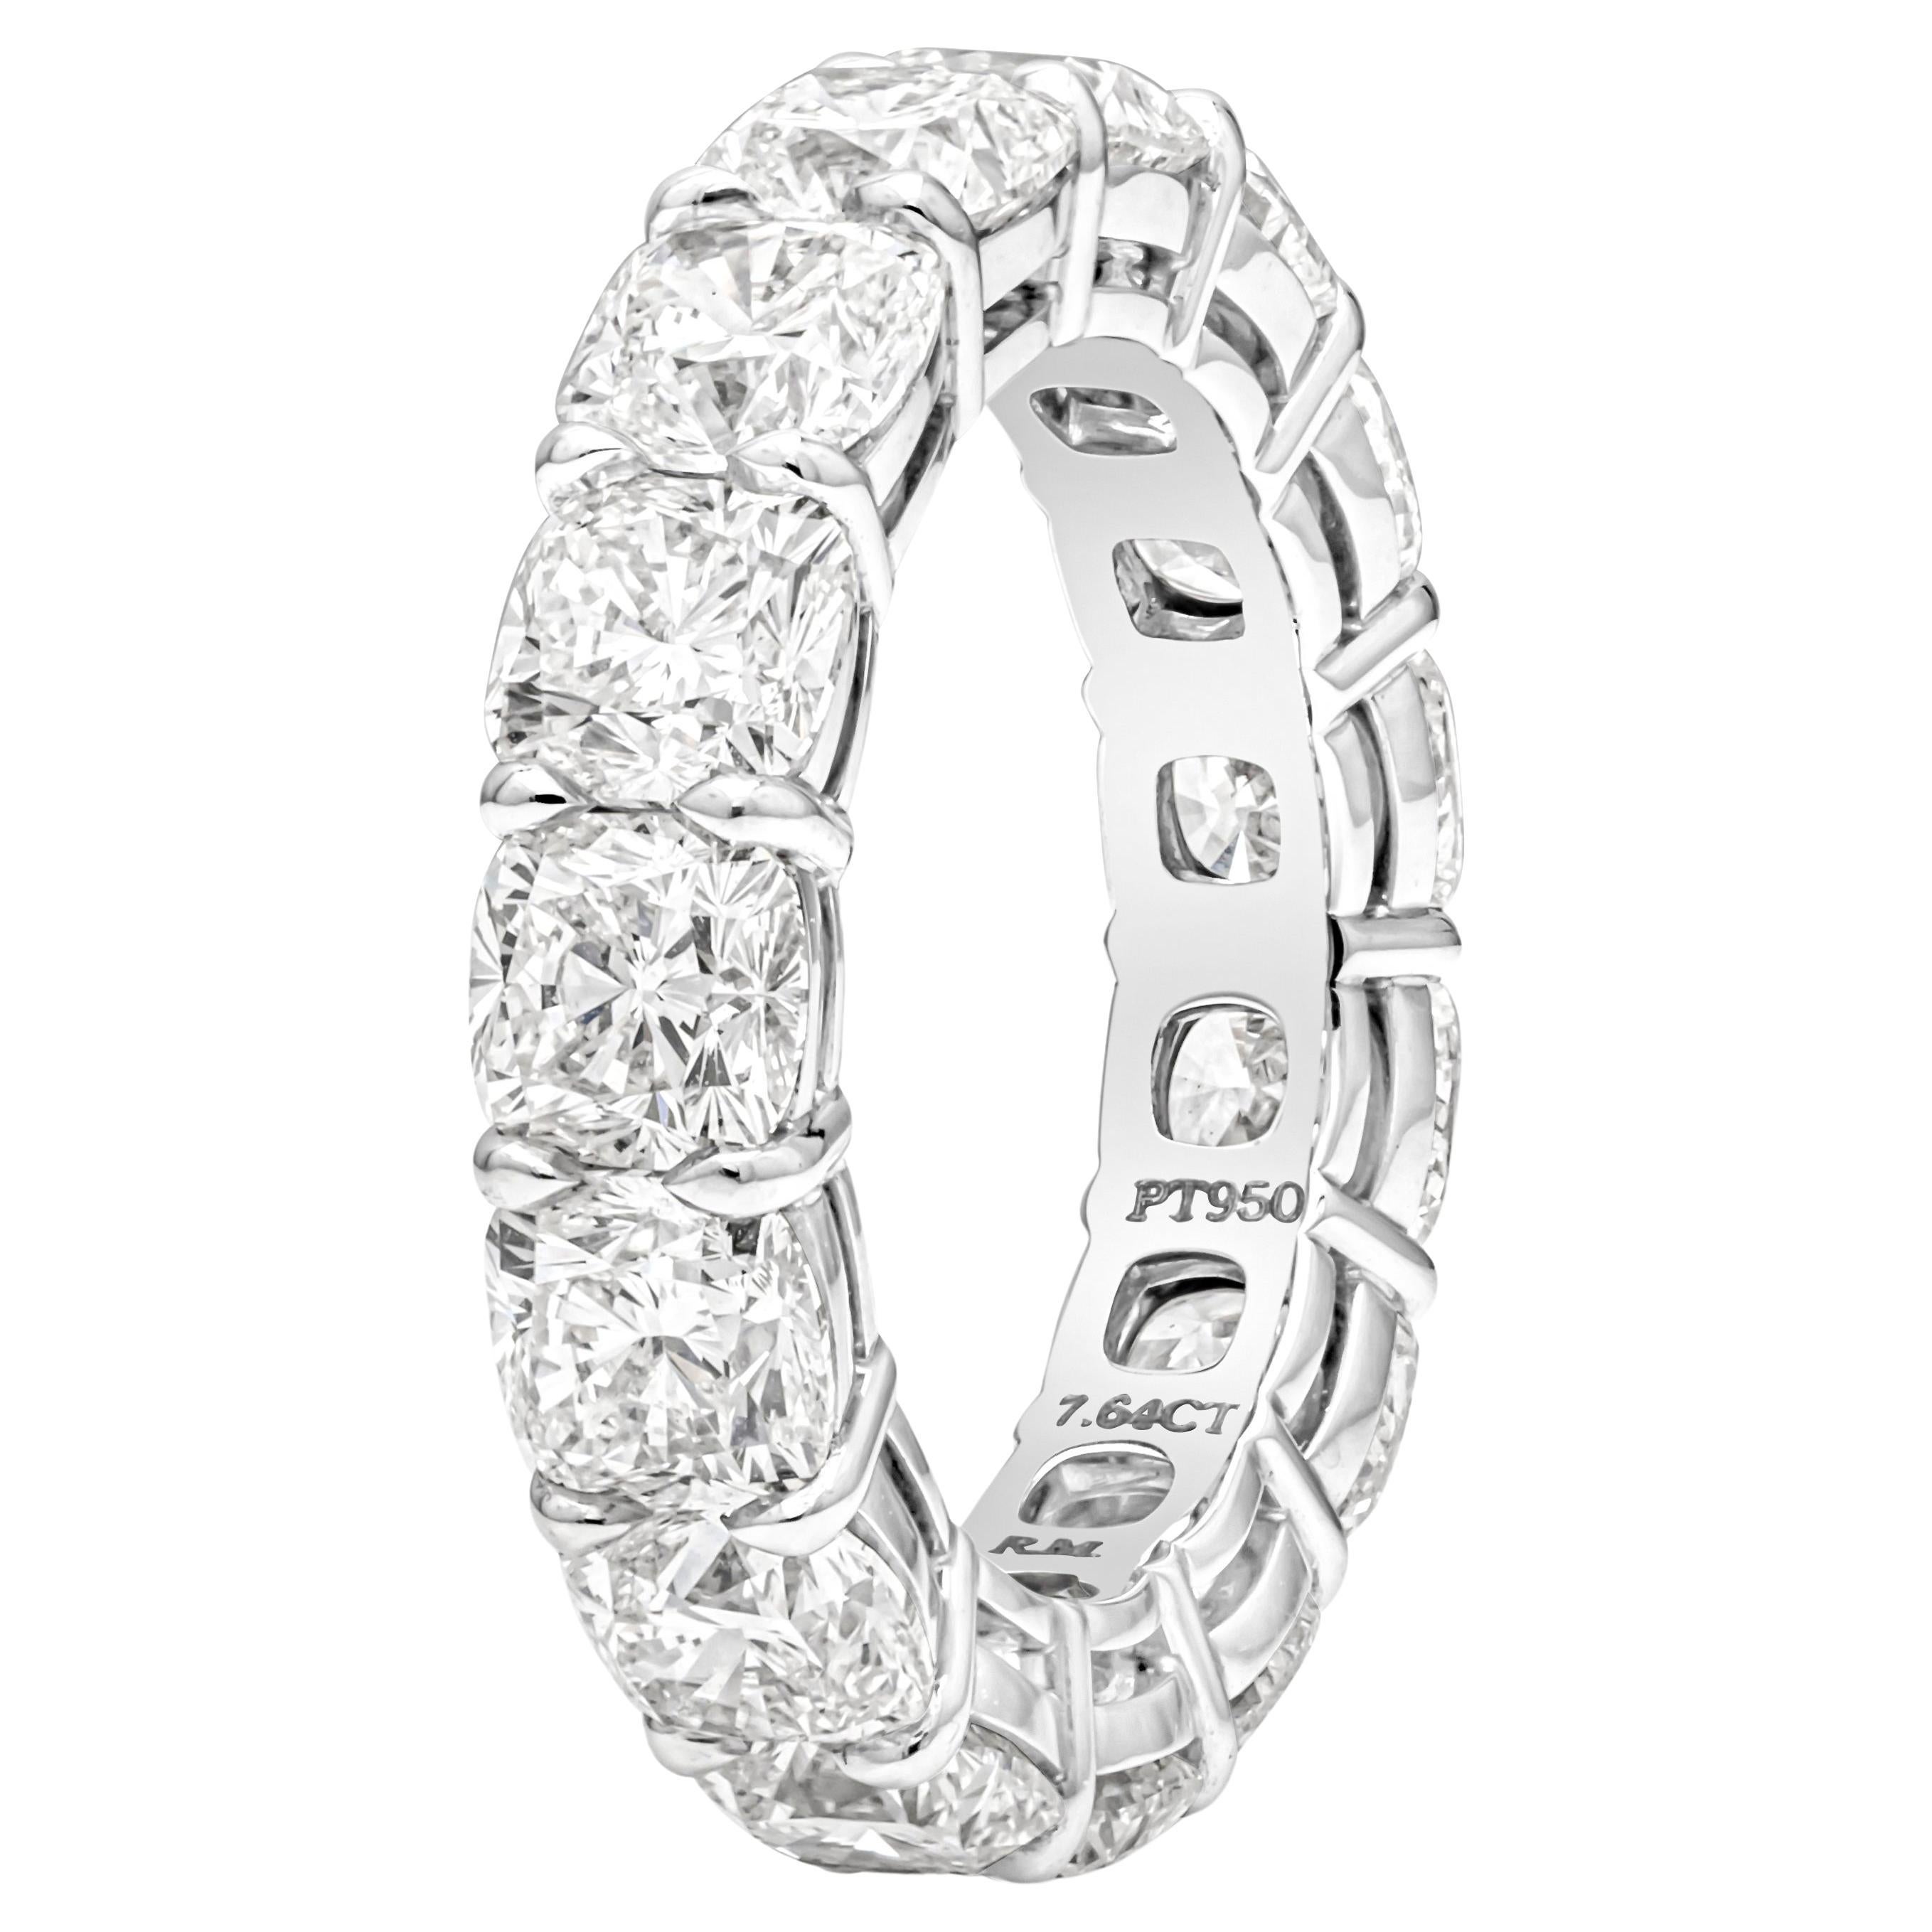 GIA Certified 7.64 Carats Total Cushion Cut Diamond Eternity Wedding Band Ring For Sale